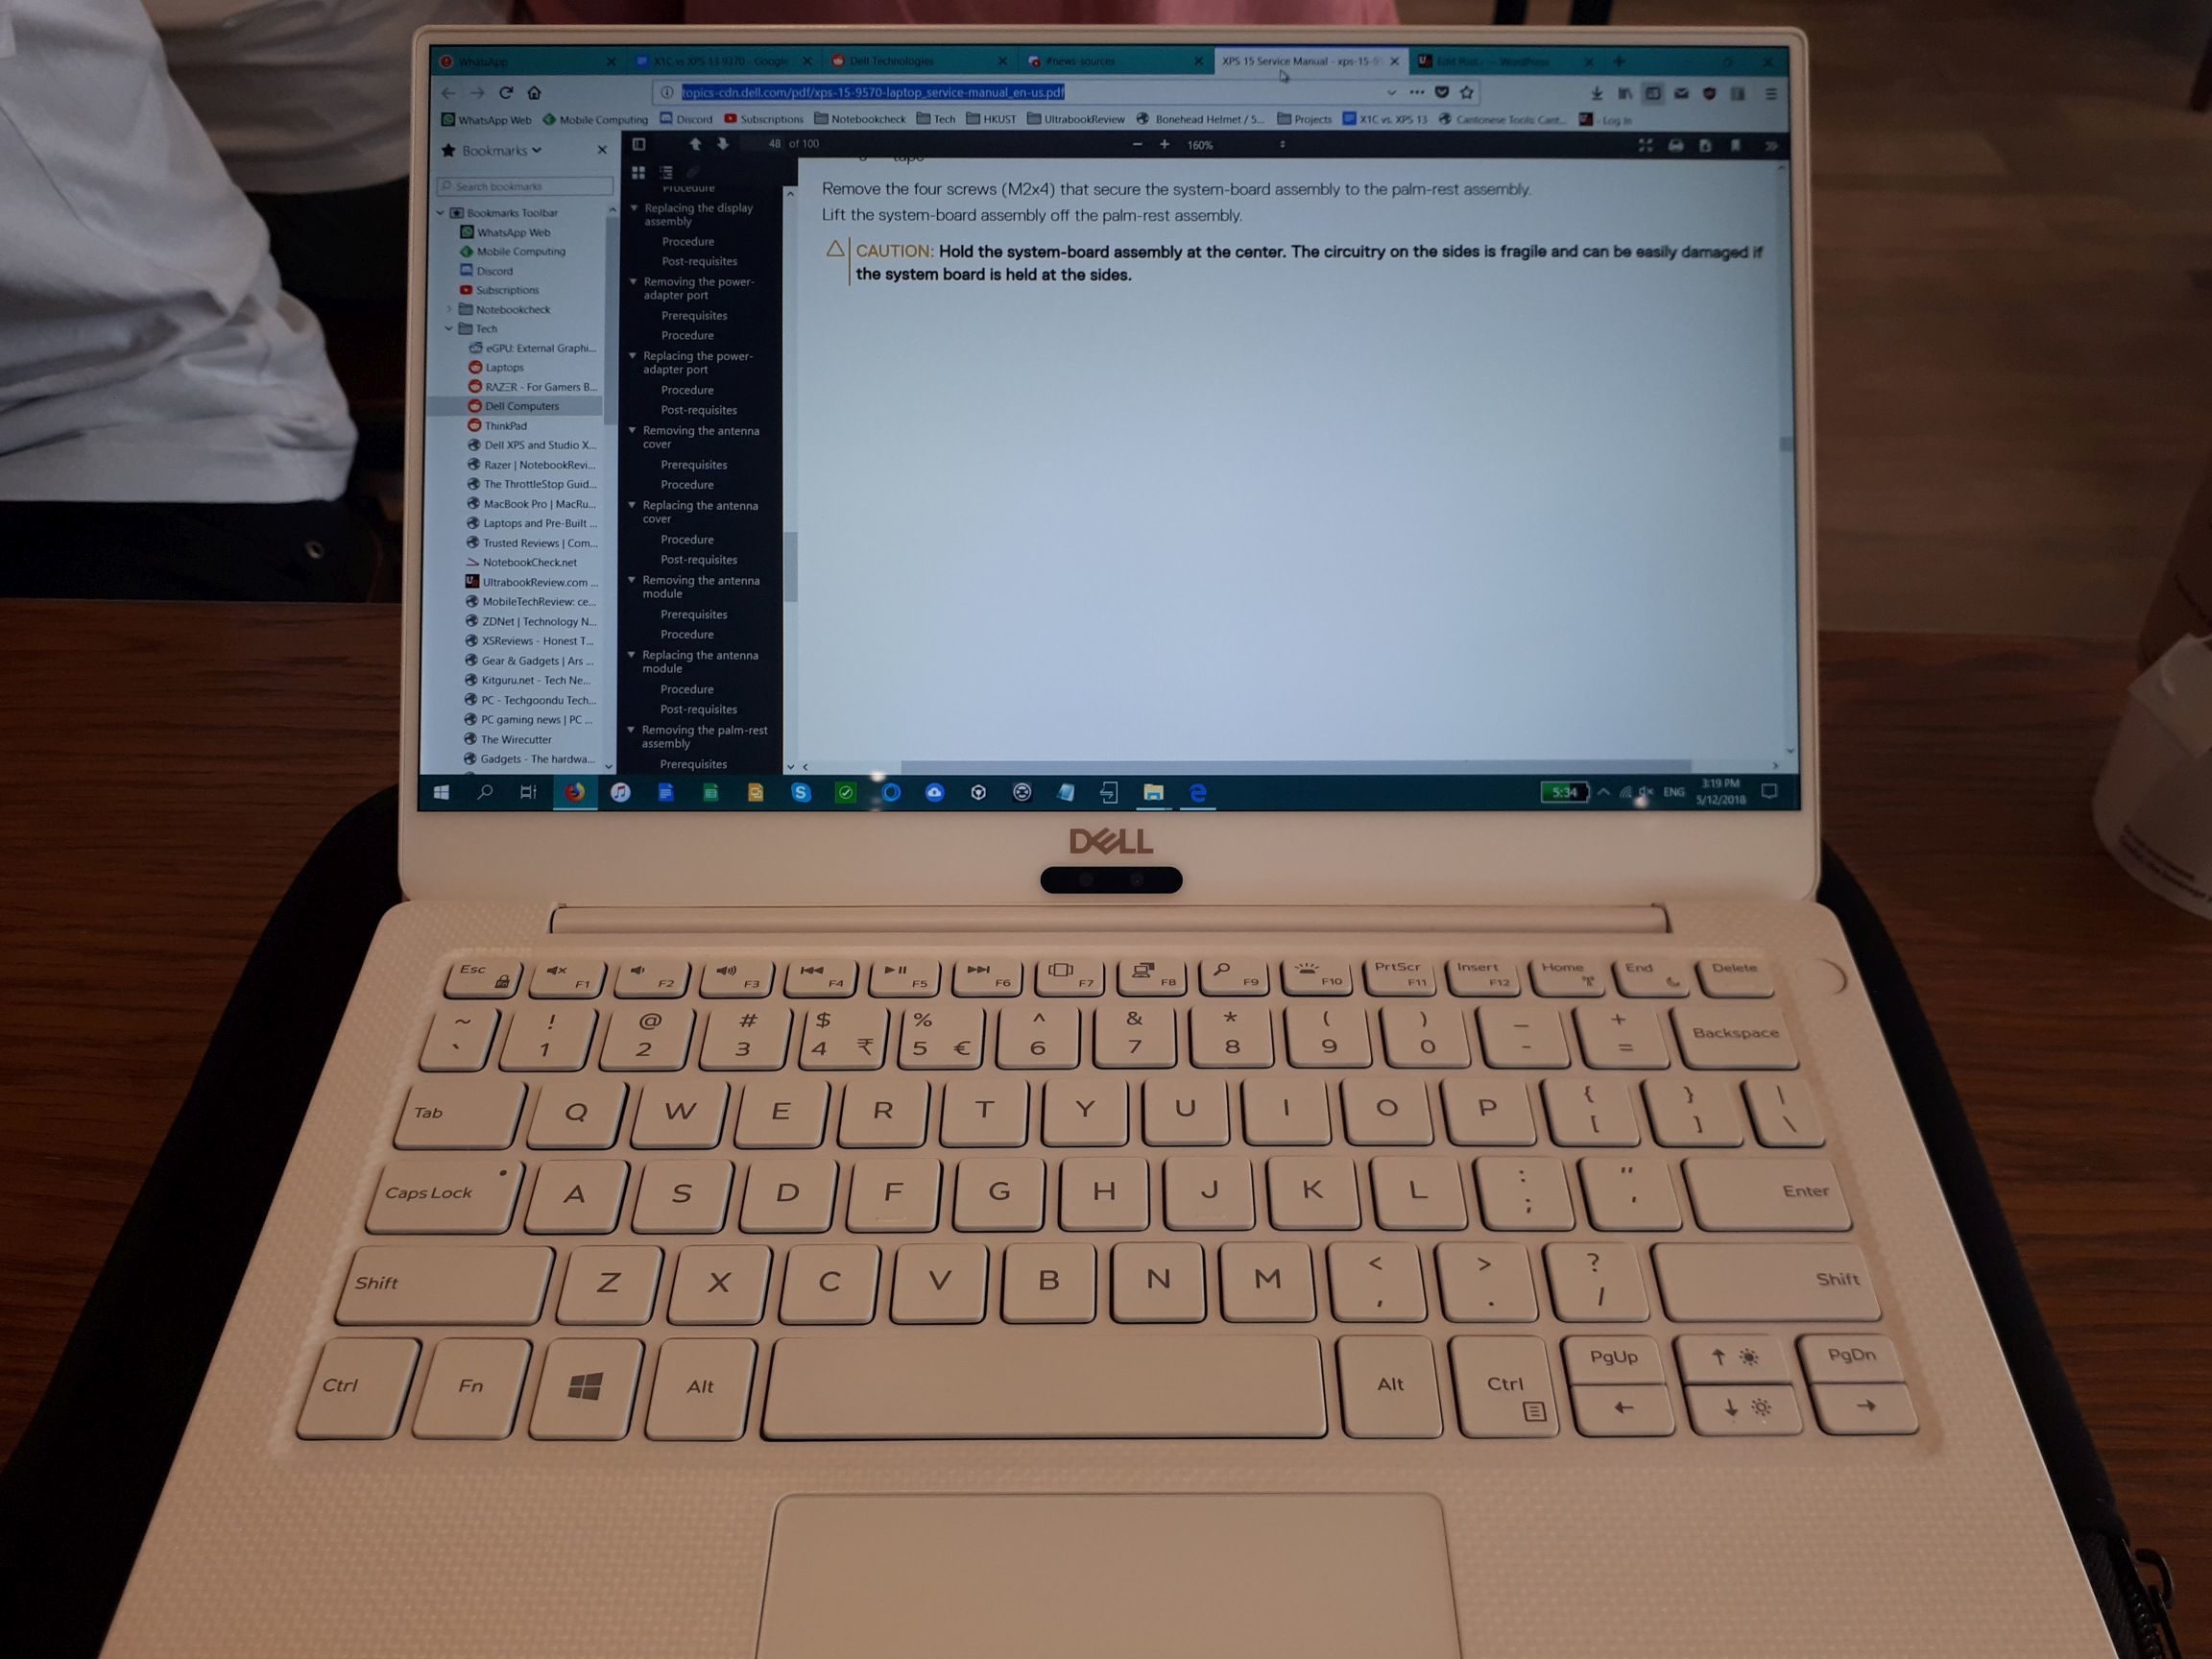 The white deck is a fantastic material, but it's a little too short when typing in confined spaces as it can press into your wrists.